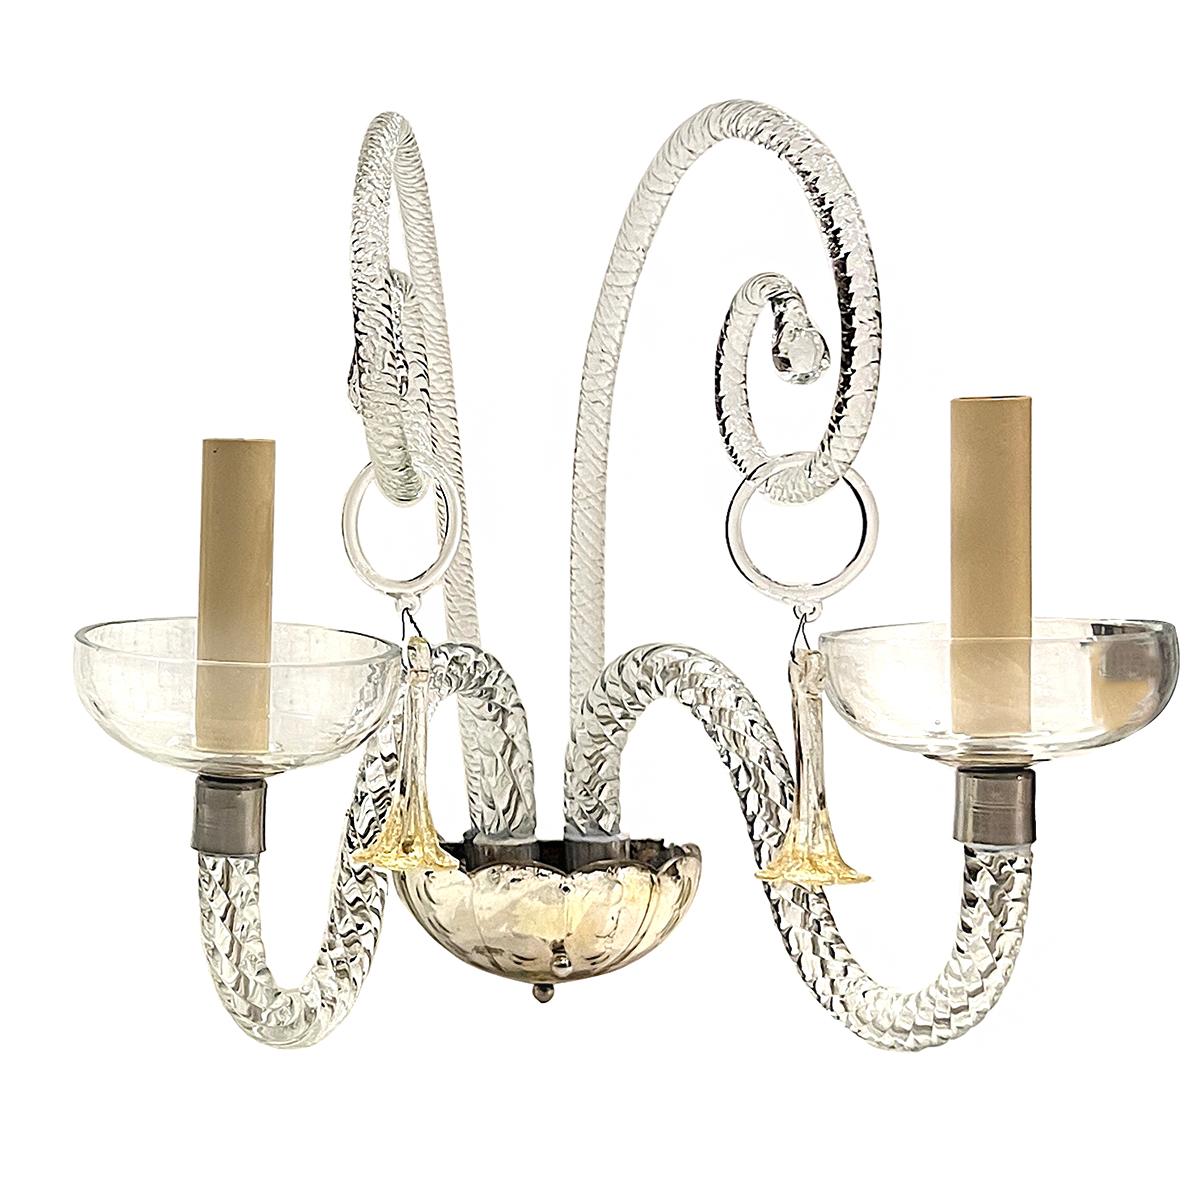 Pair of circa 1920's antique Murano glass two-arm sconces.

Measurements:
Height: 13